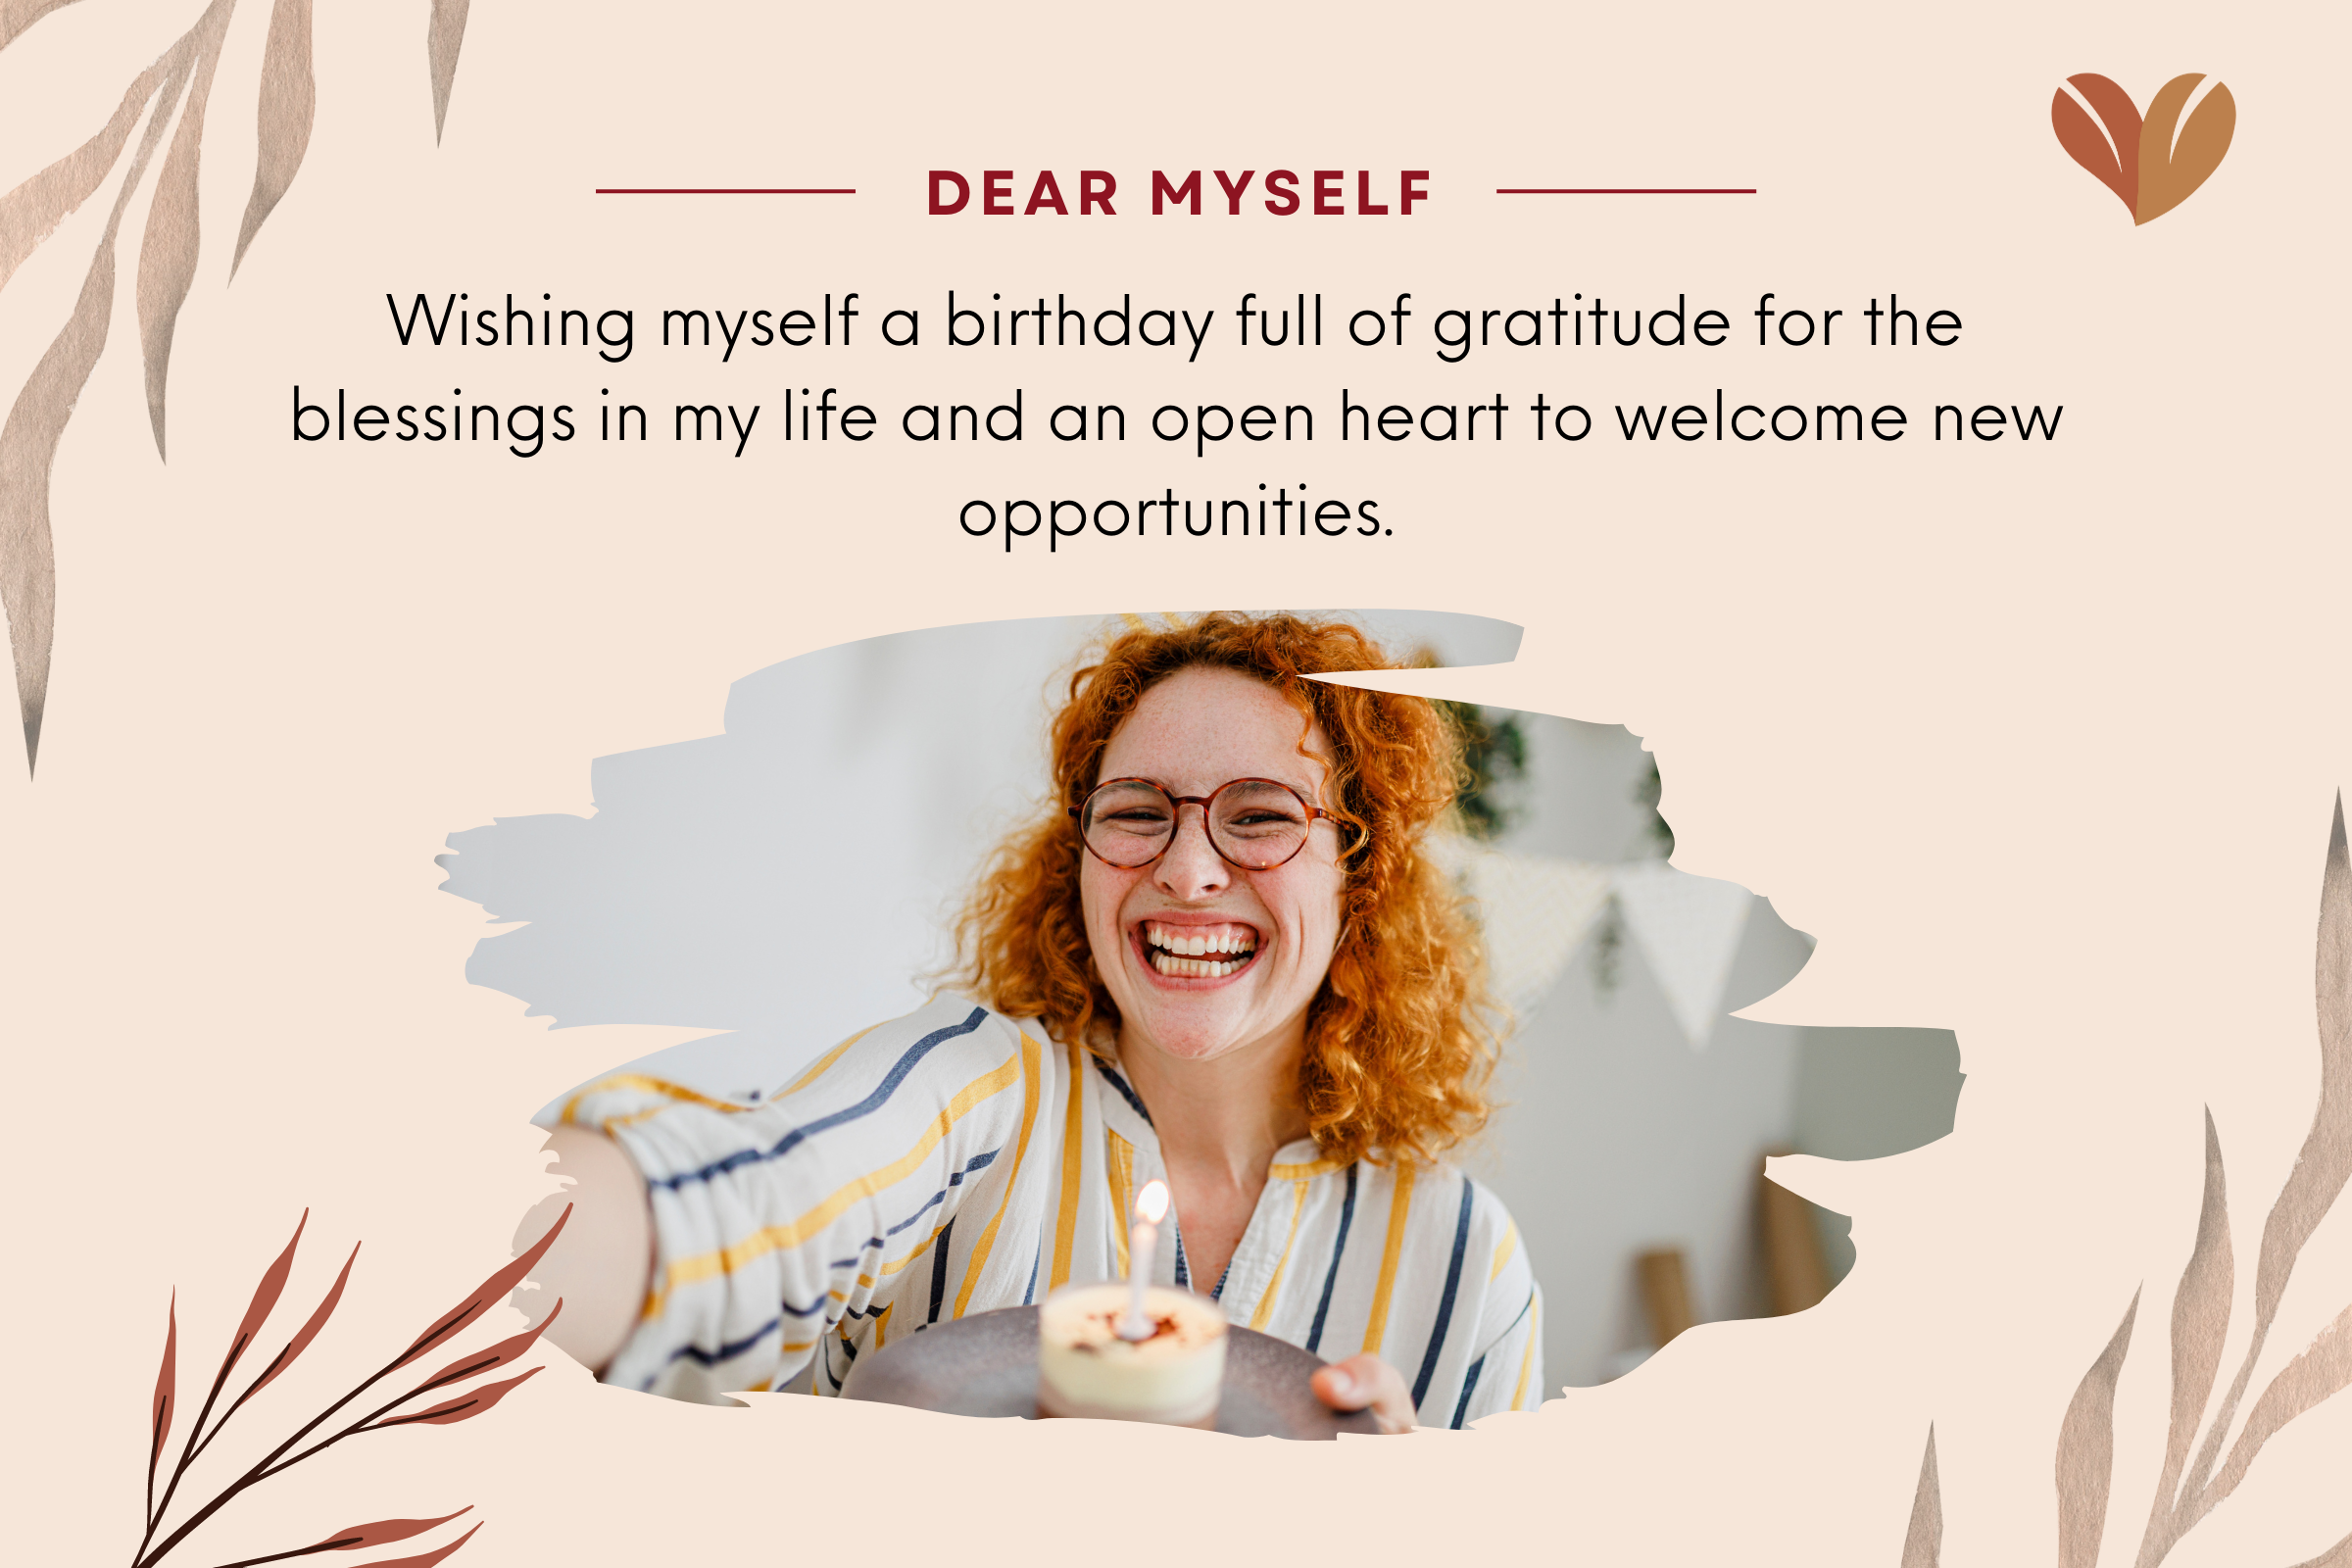 Celebrate yourself and the amazing person you are, with birthday wishes that bring warmth to your heart